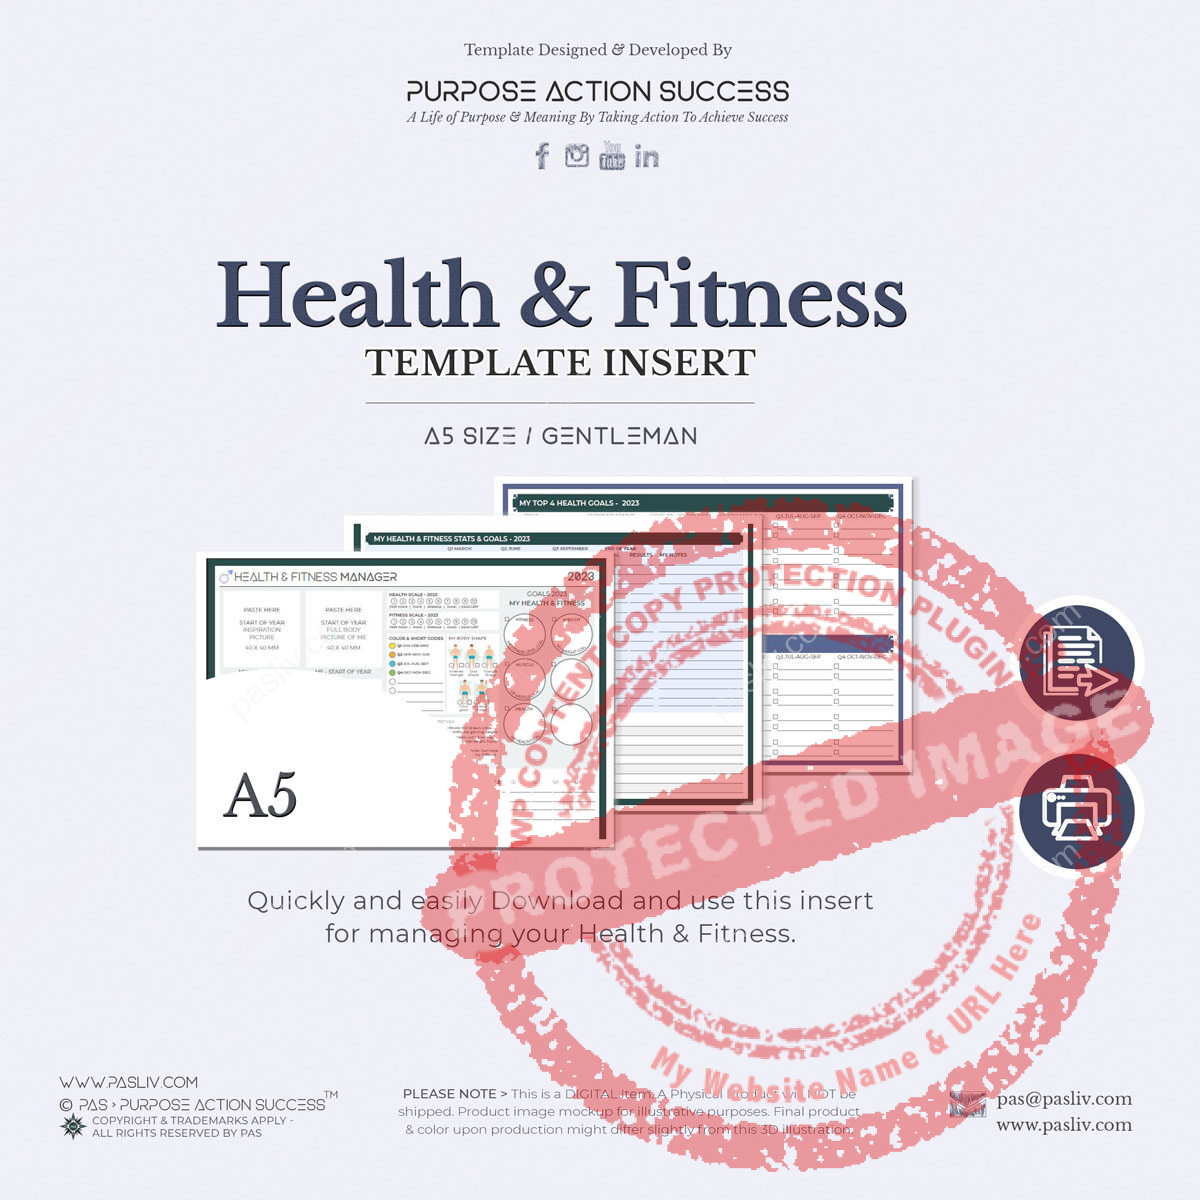 A5 PAS Health & Fitness Template for GENTS - Copyright & Trademarks By PAS > Purpose Action Success - All Rights Reserved